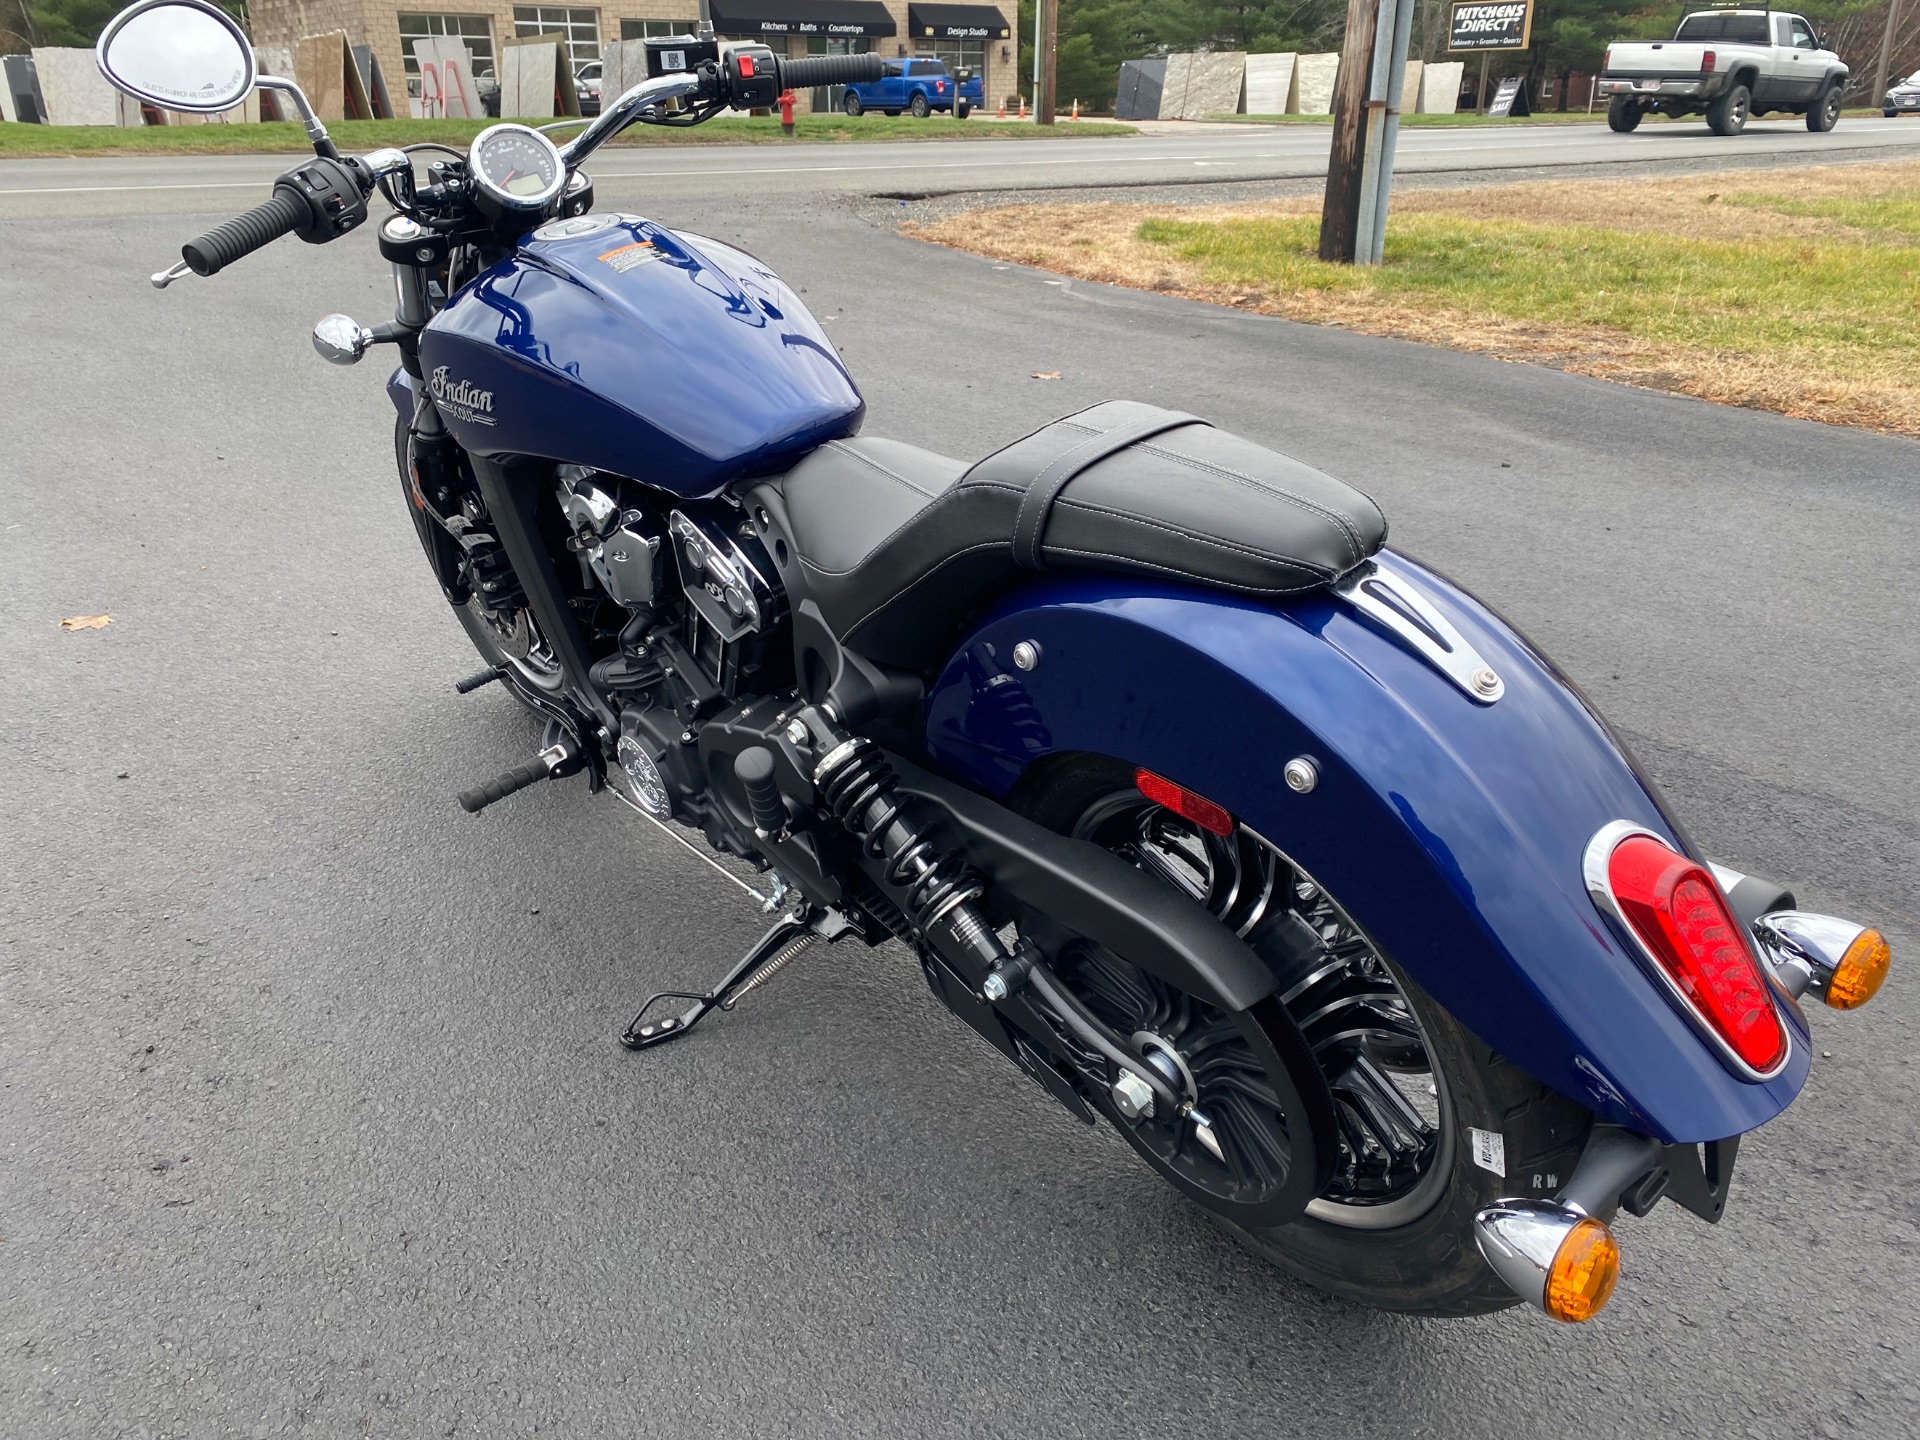 2021 Indian Scout® ABS in Westfield, Massachusetts - Photo 5